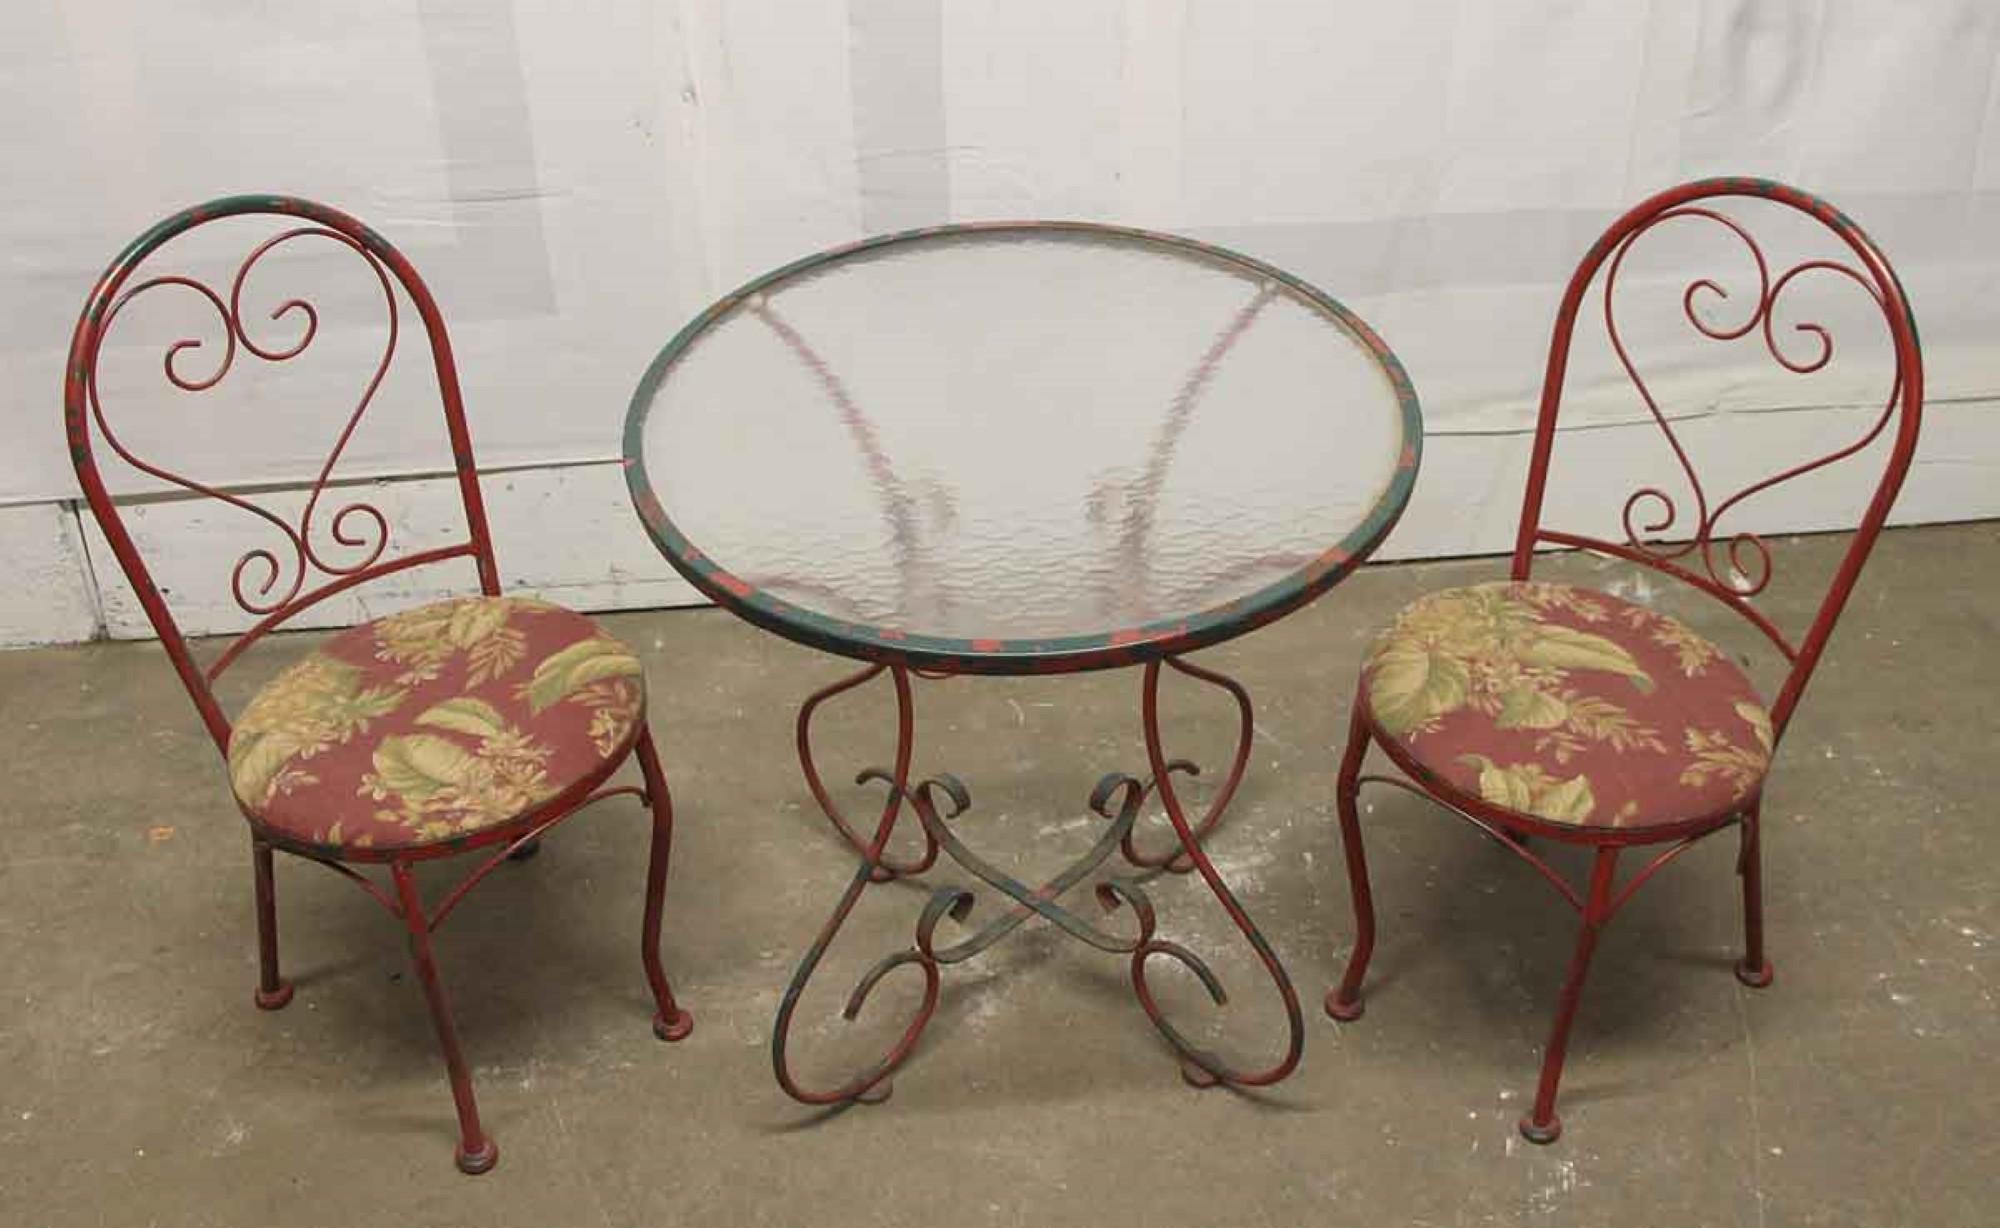 1970s distressed red and green painted steel patio table set. Set includes one round glass top table table and two chairs with leafy floral upholstery. This can be seen at our 400 Gilligan St location in Scranton, PA. 